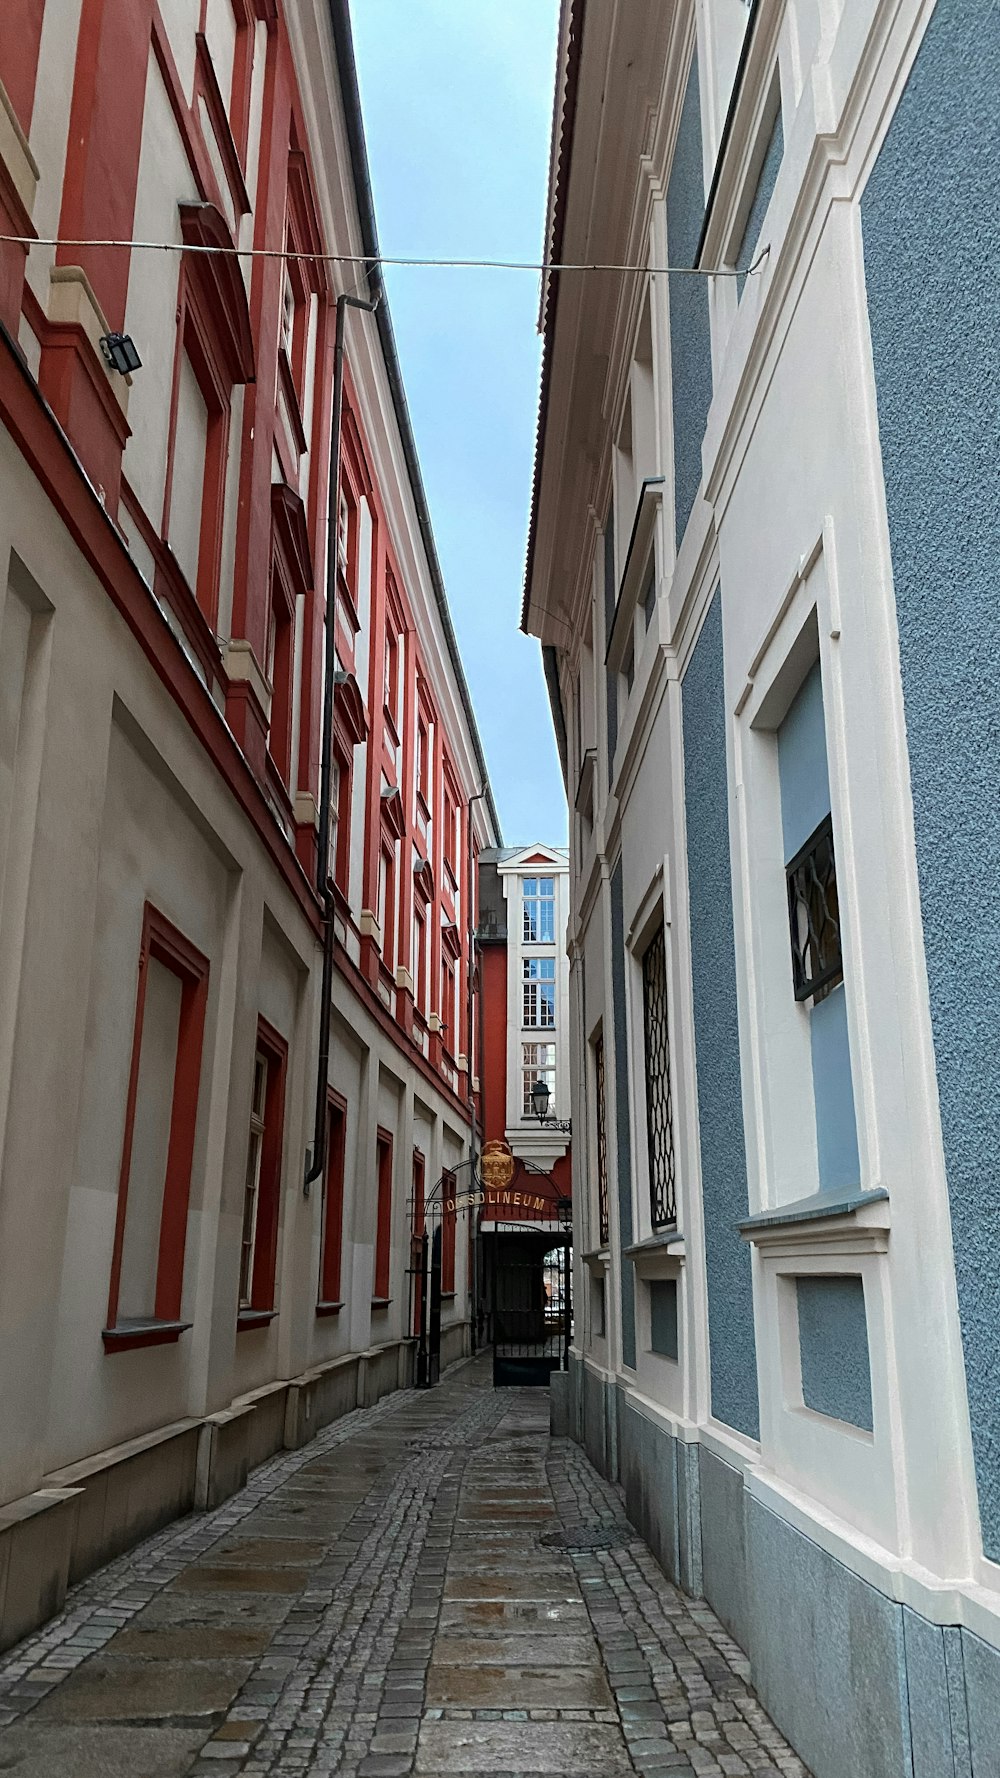 a cobblestone street lined with red and white buildings